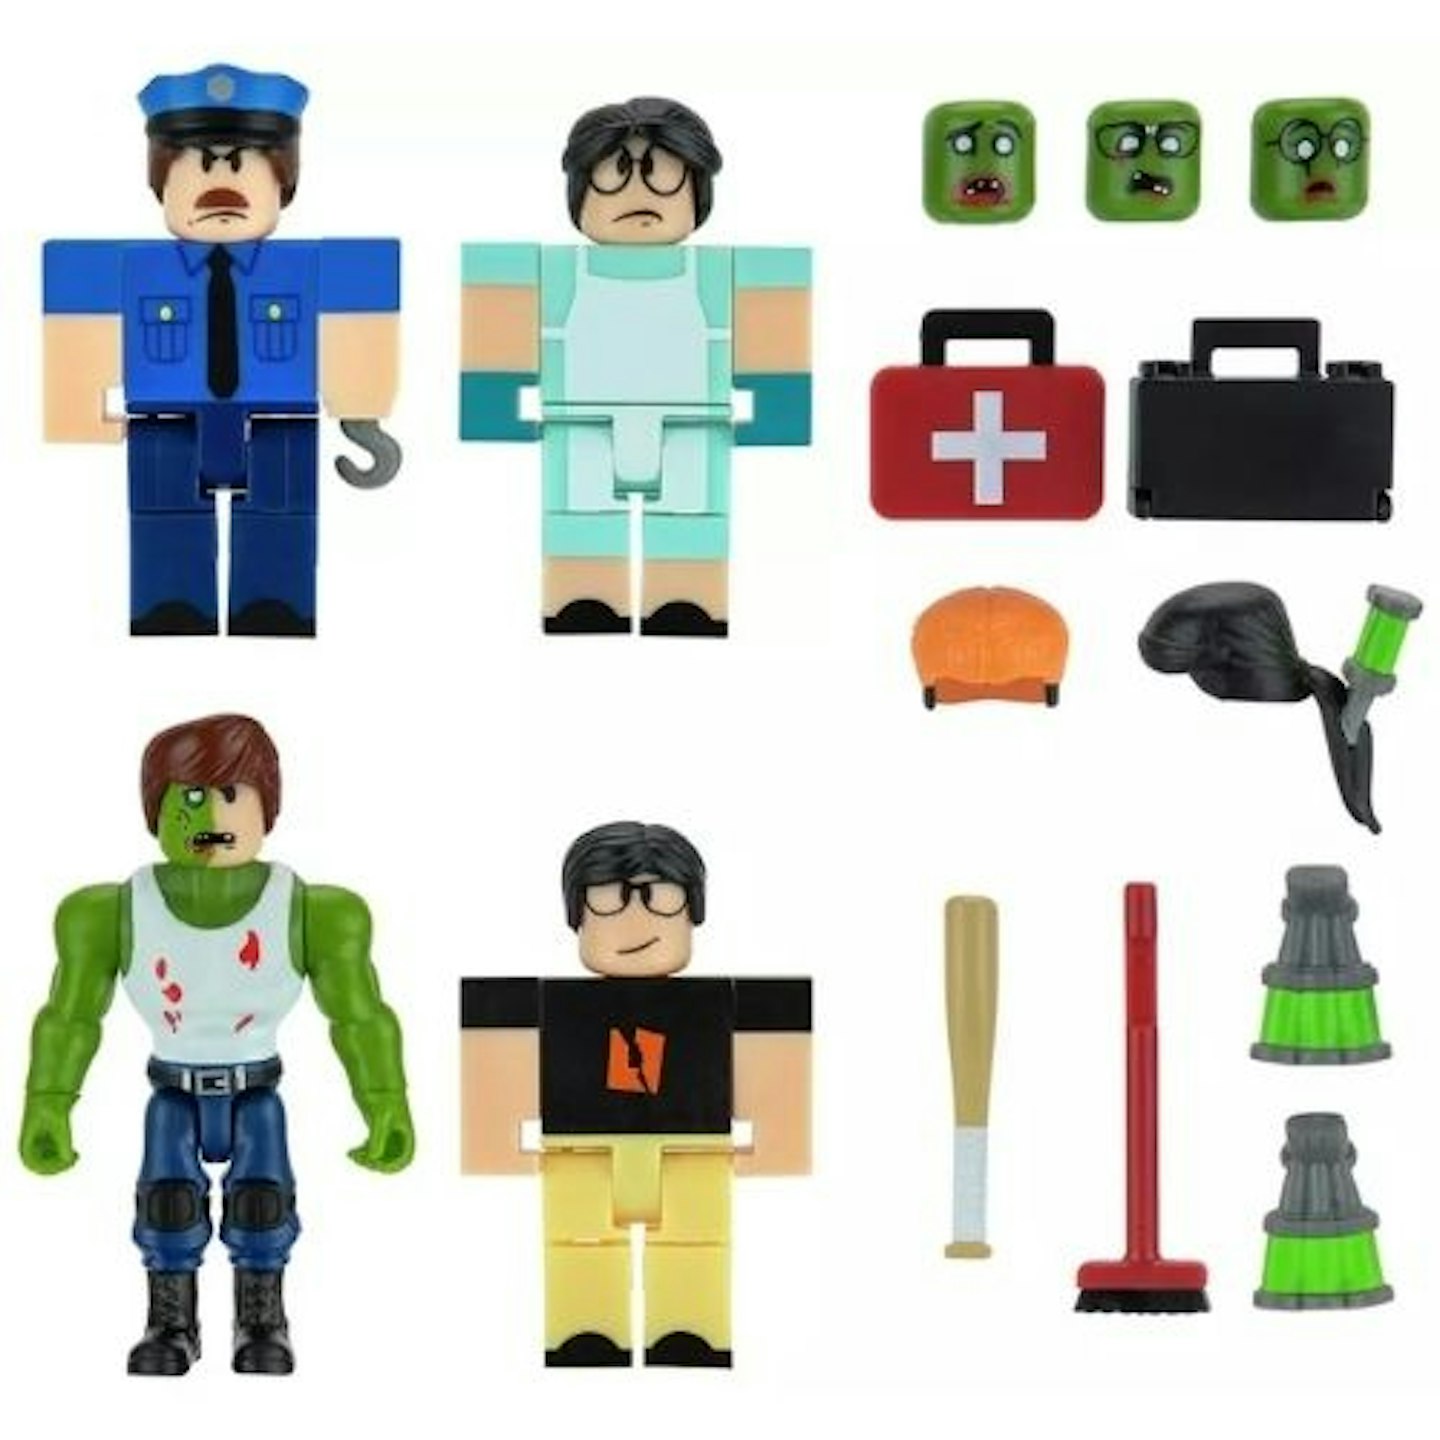 Roblox Toys To Bring The Virtual Game To Life Offline